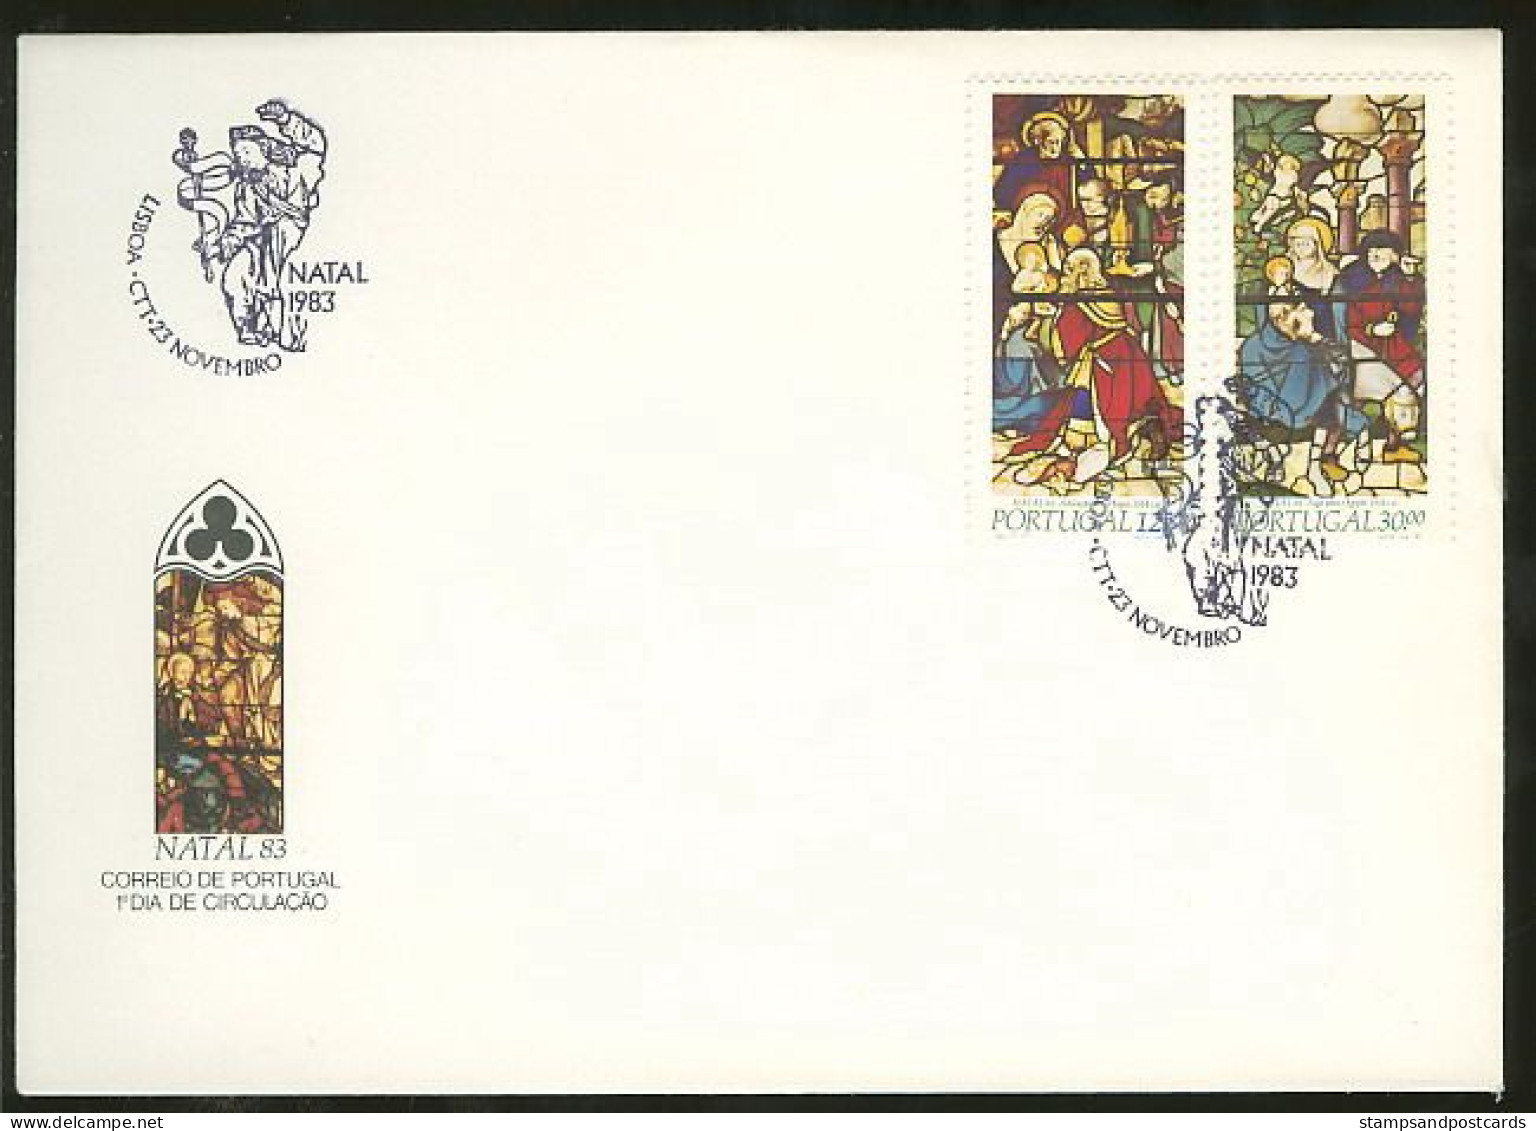 Portugal Vitraux Eglises Noel 1983 FDC Stained-glass From Churches Christmas 1983 FDC - Glasses & Stained-Glasses